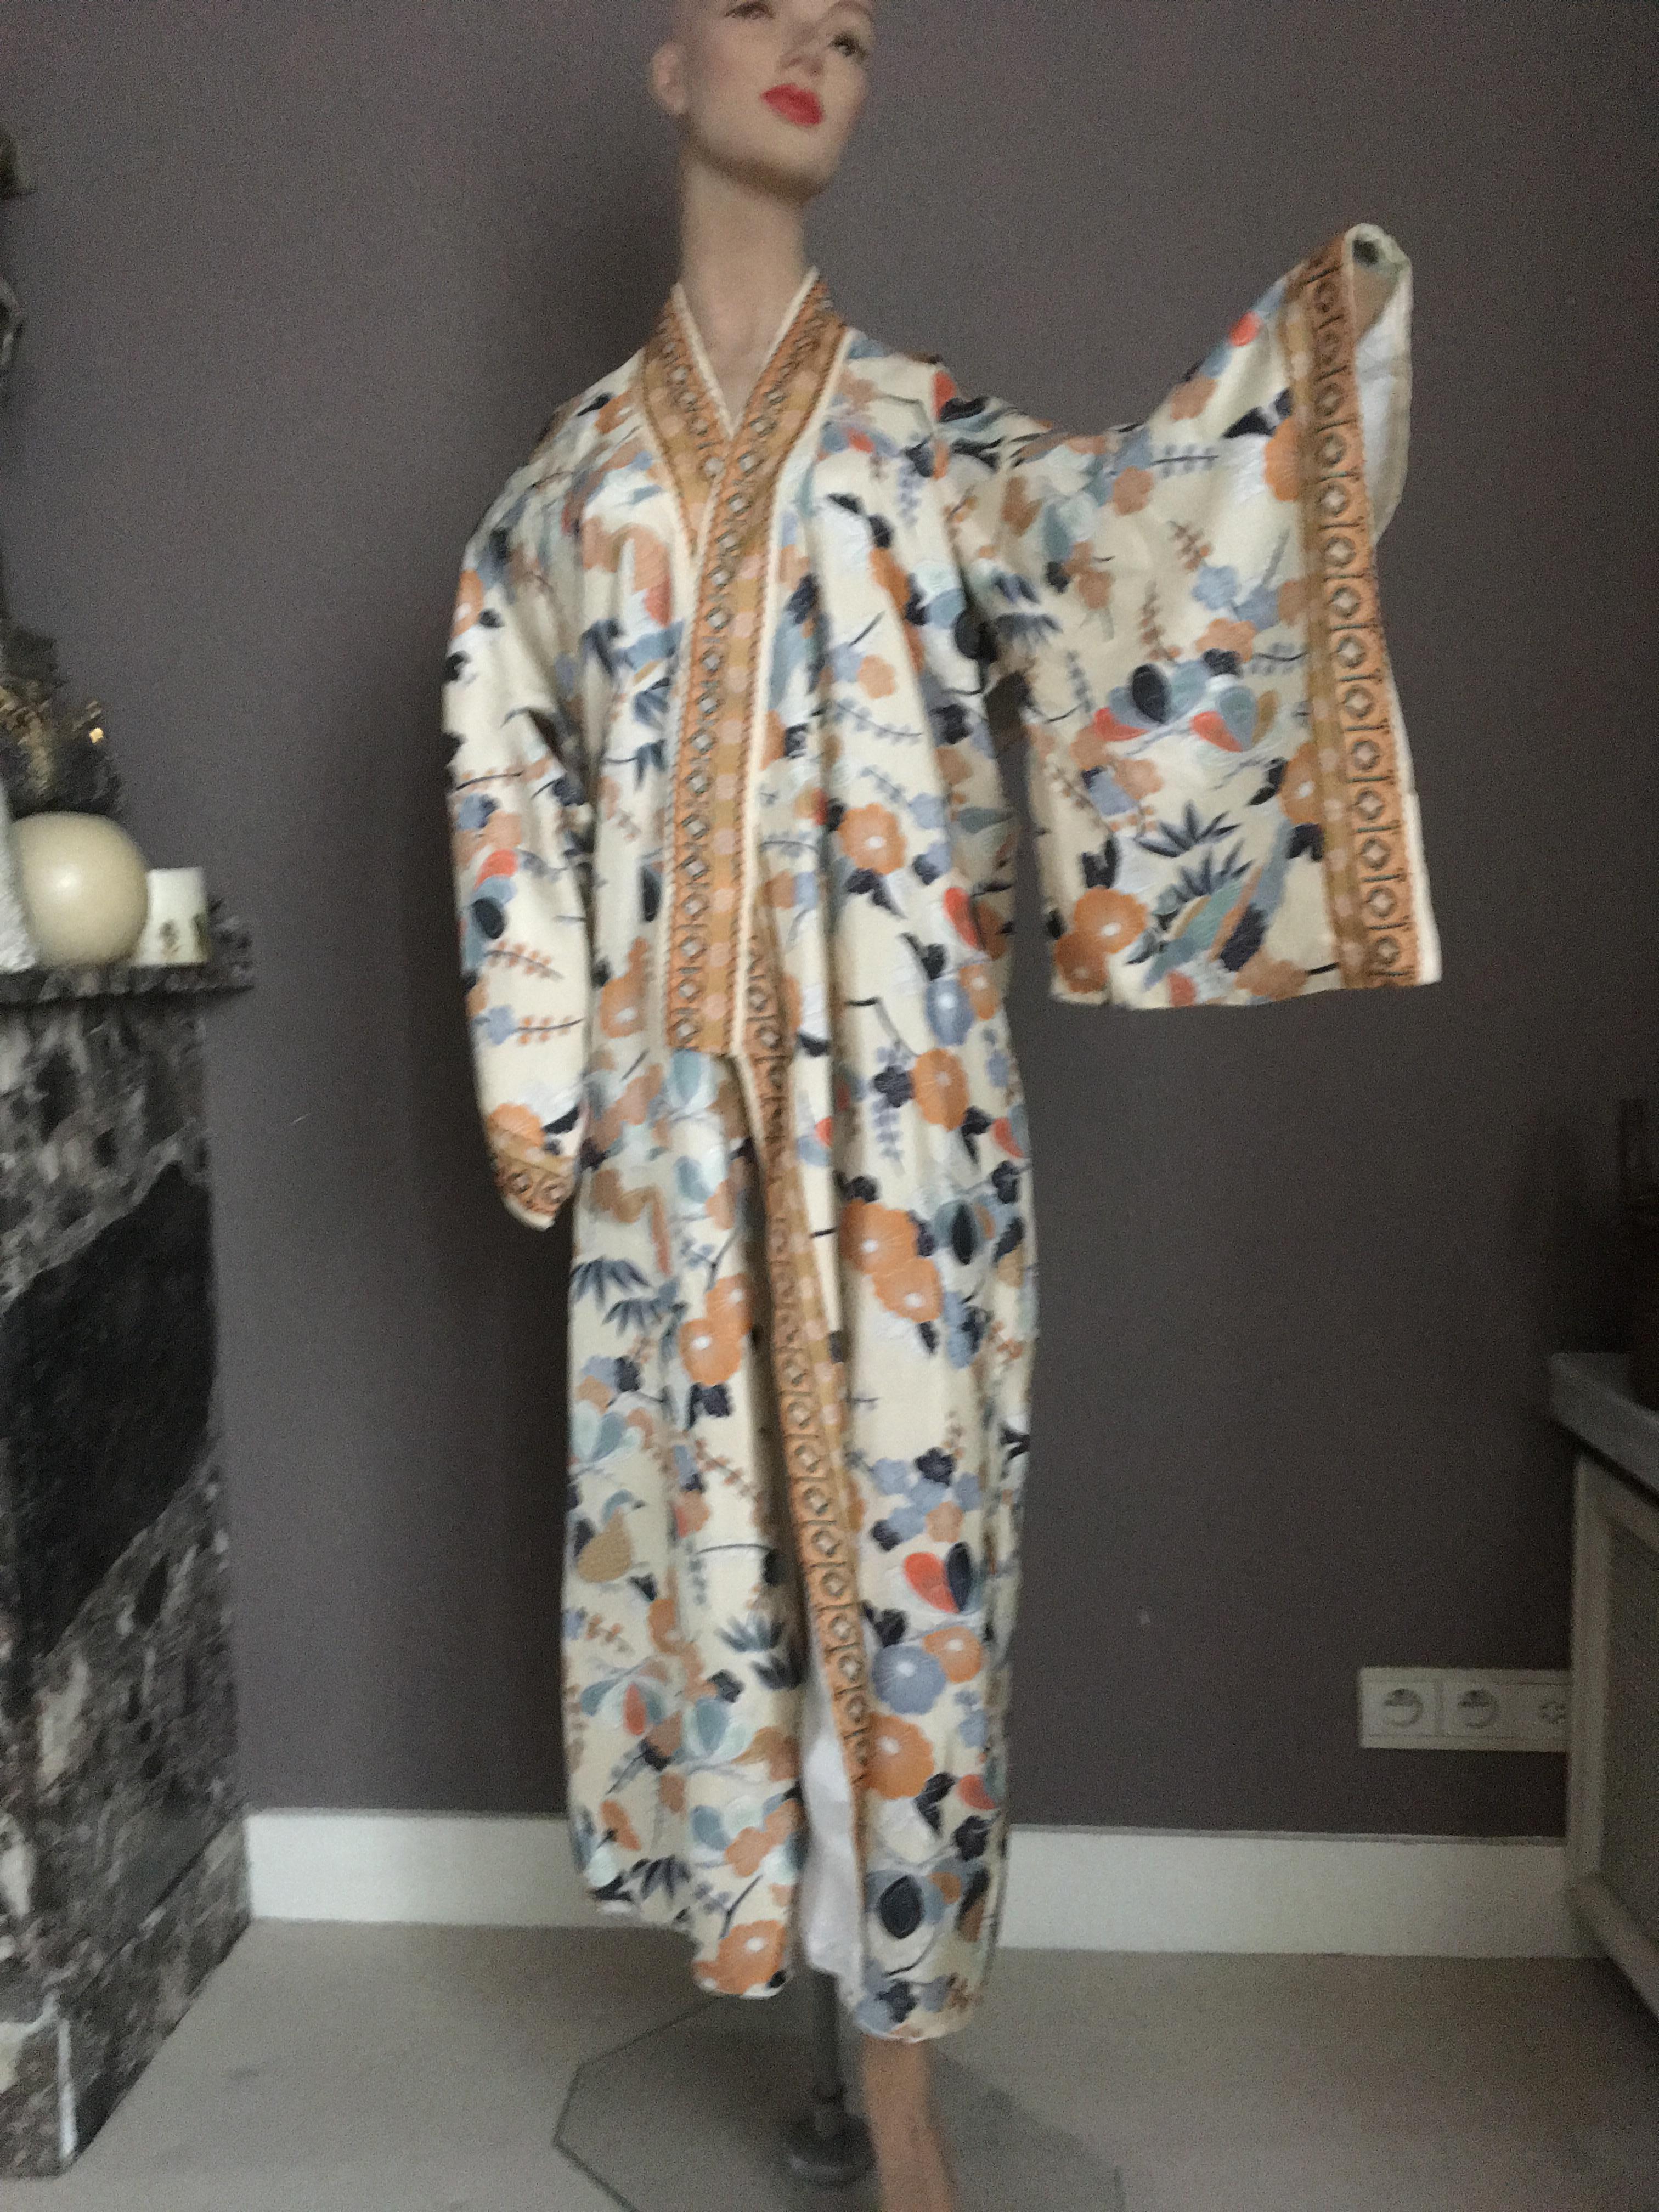 This is a very nice dressable Kimono with a beautiful Japanese flower print in the colors deep blue,light blue ,green red soft orange.